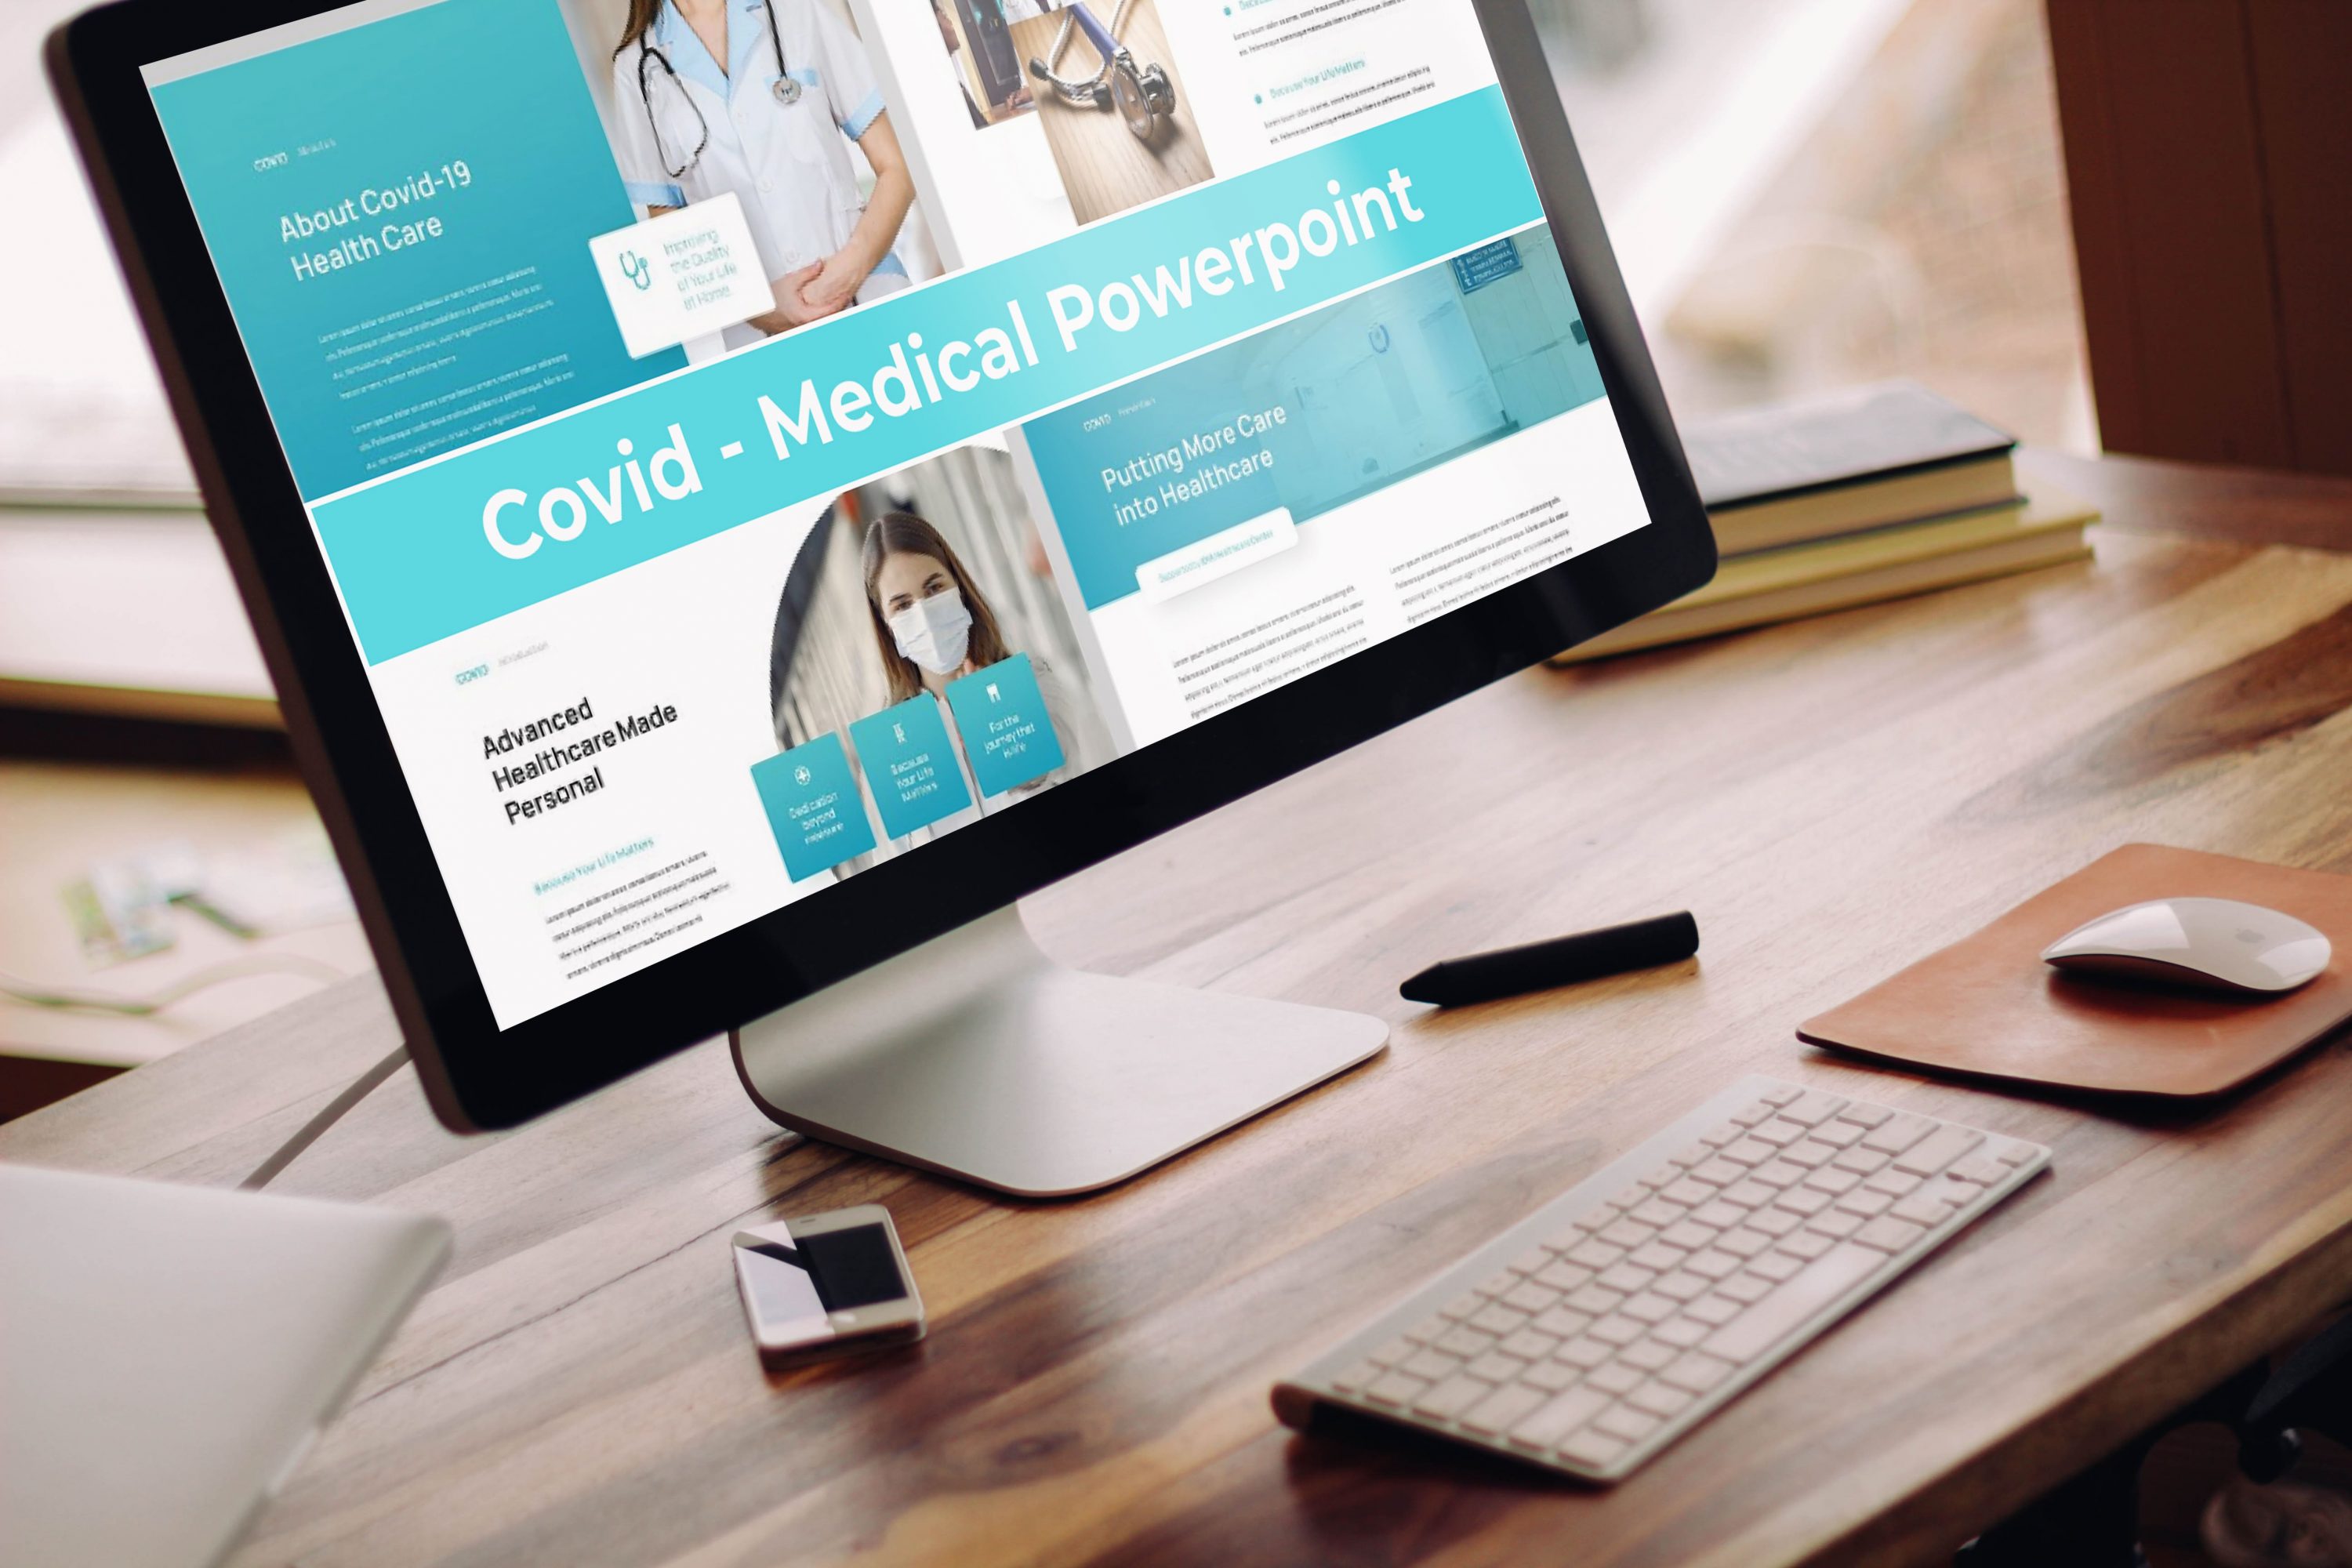 Desktop option of the Covid - Medical Powerpoint.